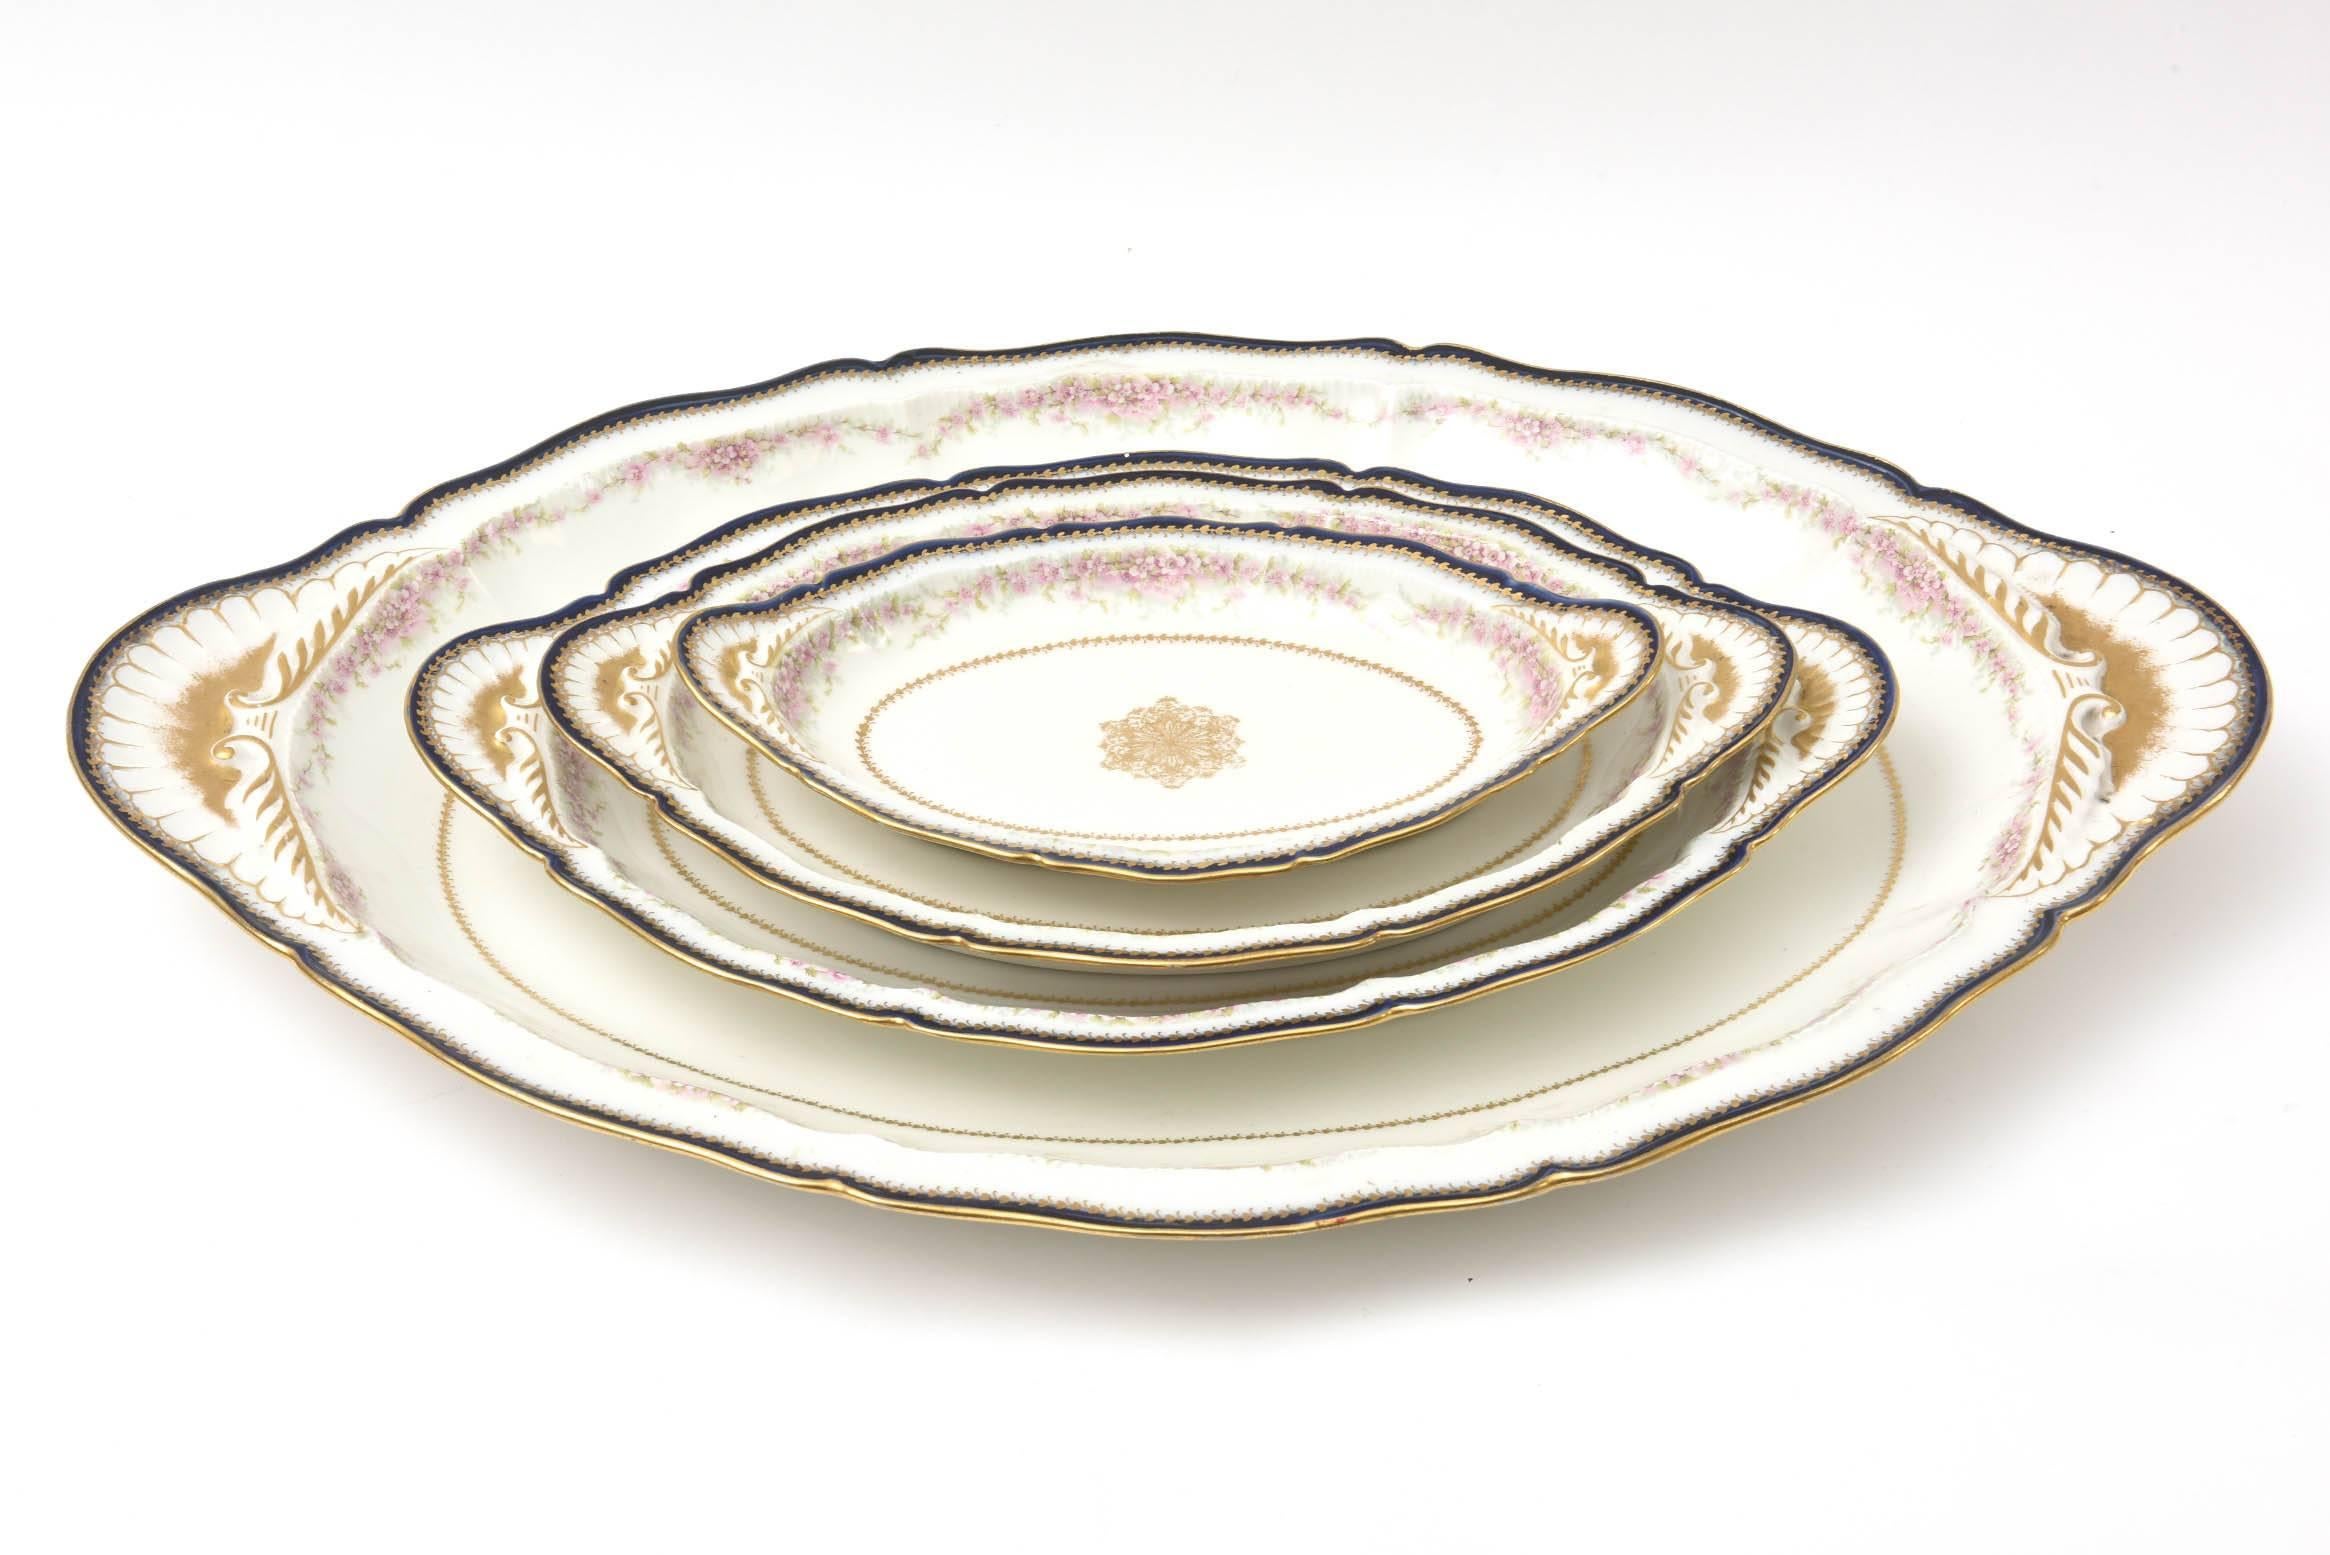 A great and hard to find set of four matching platters. Graduating in size from 10.0 inches to 19.0 inches in length. They have a delightful scallop to the edge as well as 